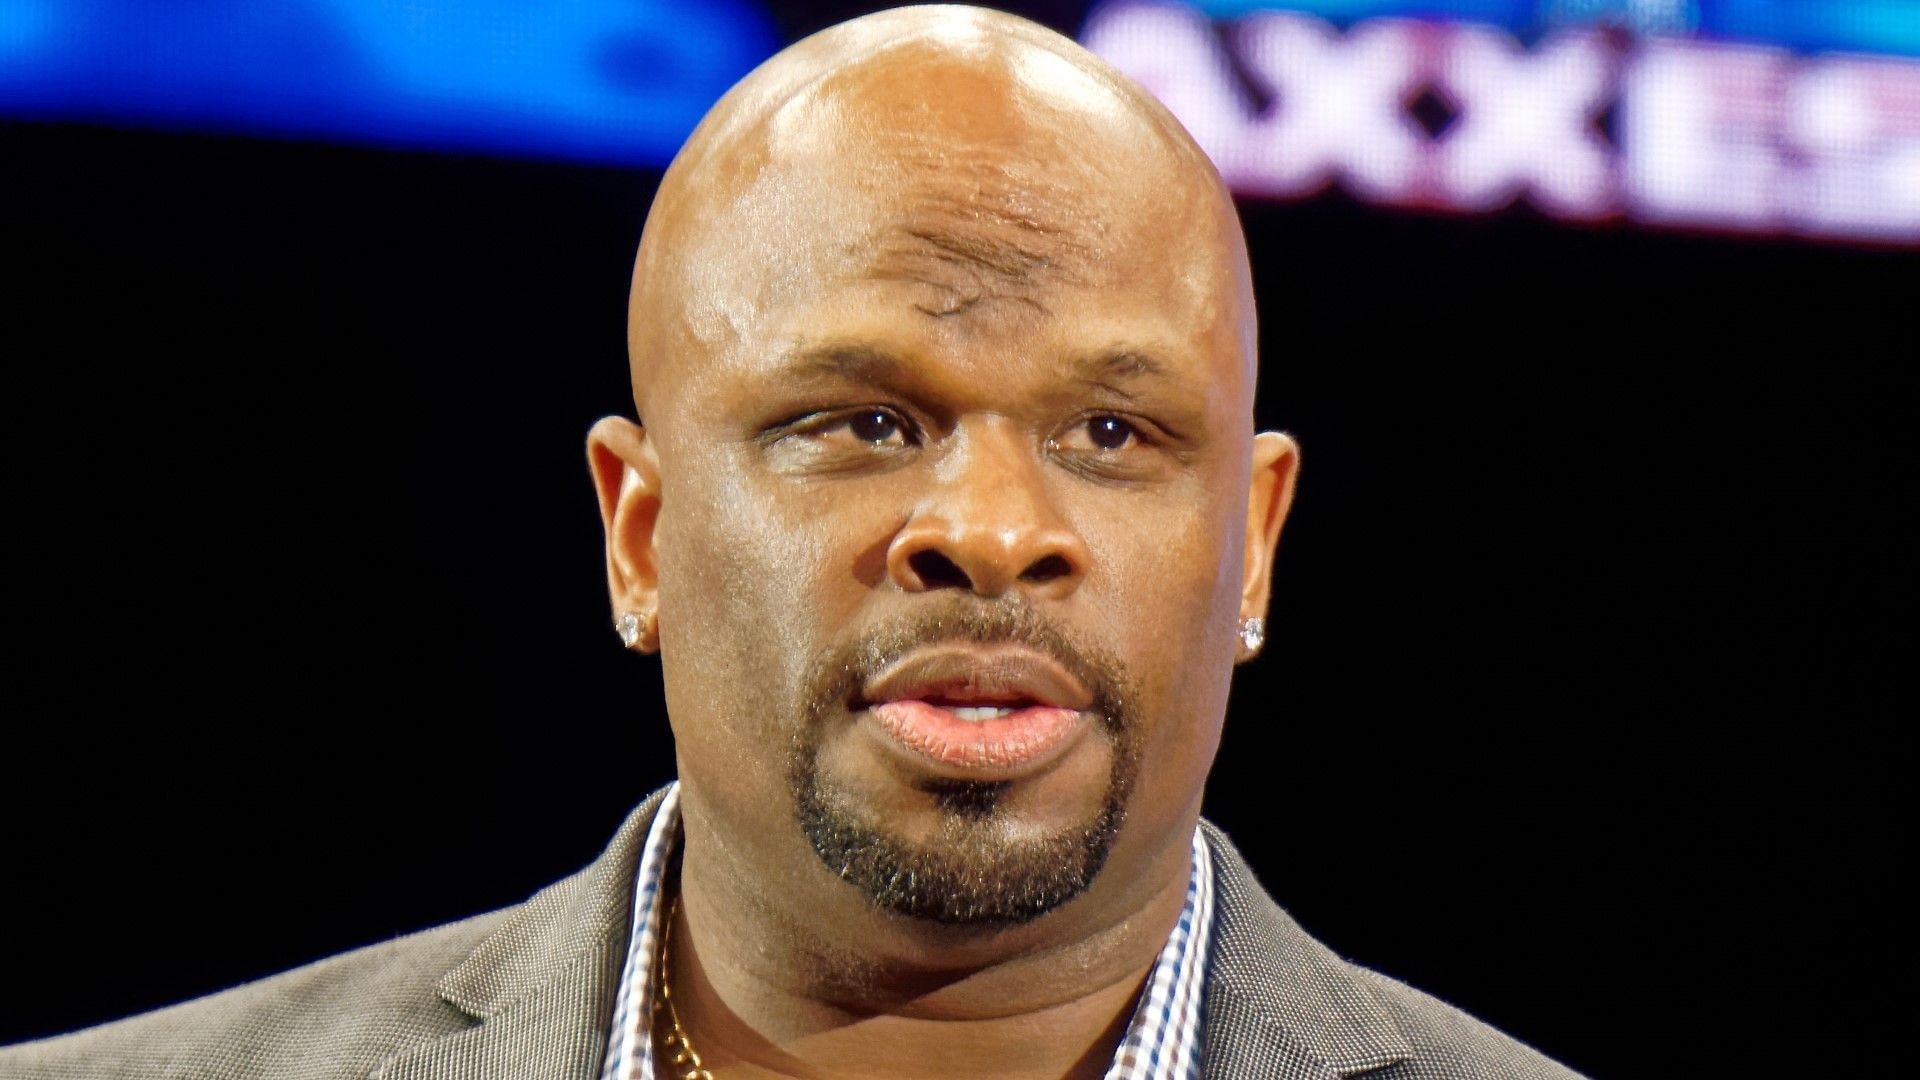 D-Von Dudley looks on from the ring